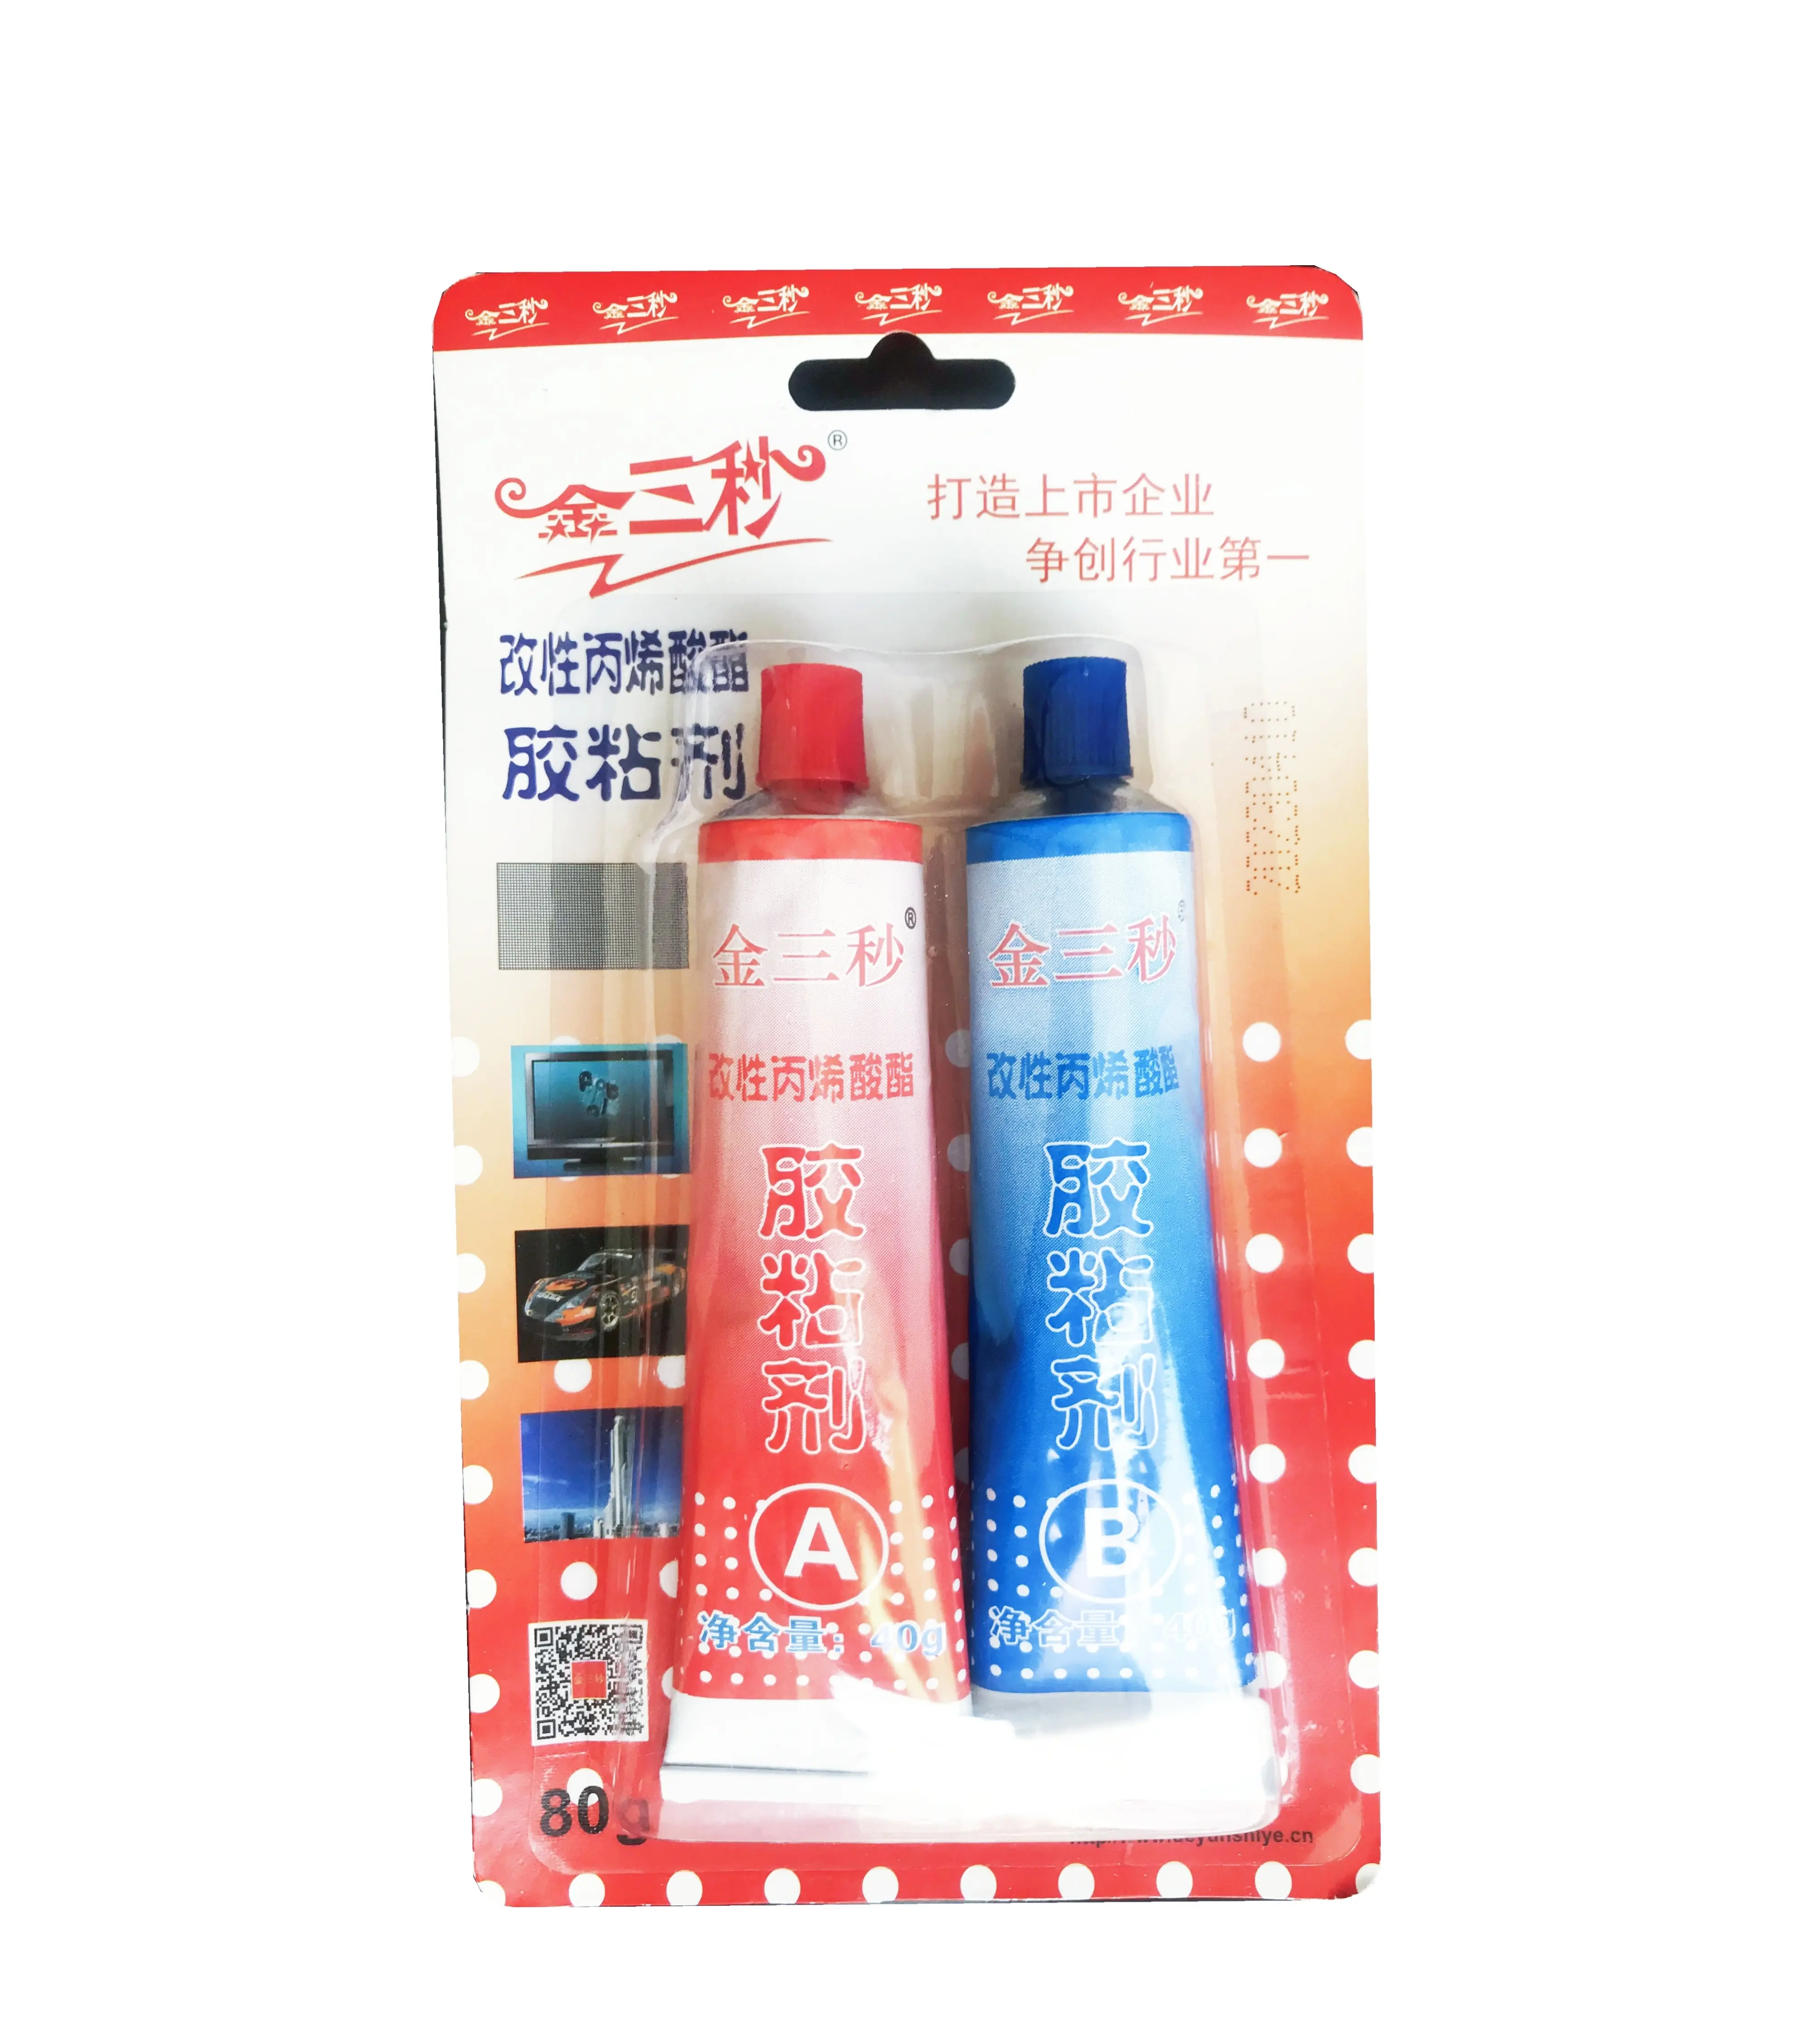 Fast Drying And Extra Strong Clear Sealant Aluminum Tube AB Glue Adhesive 20g 80g For Car Machine Table